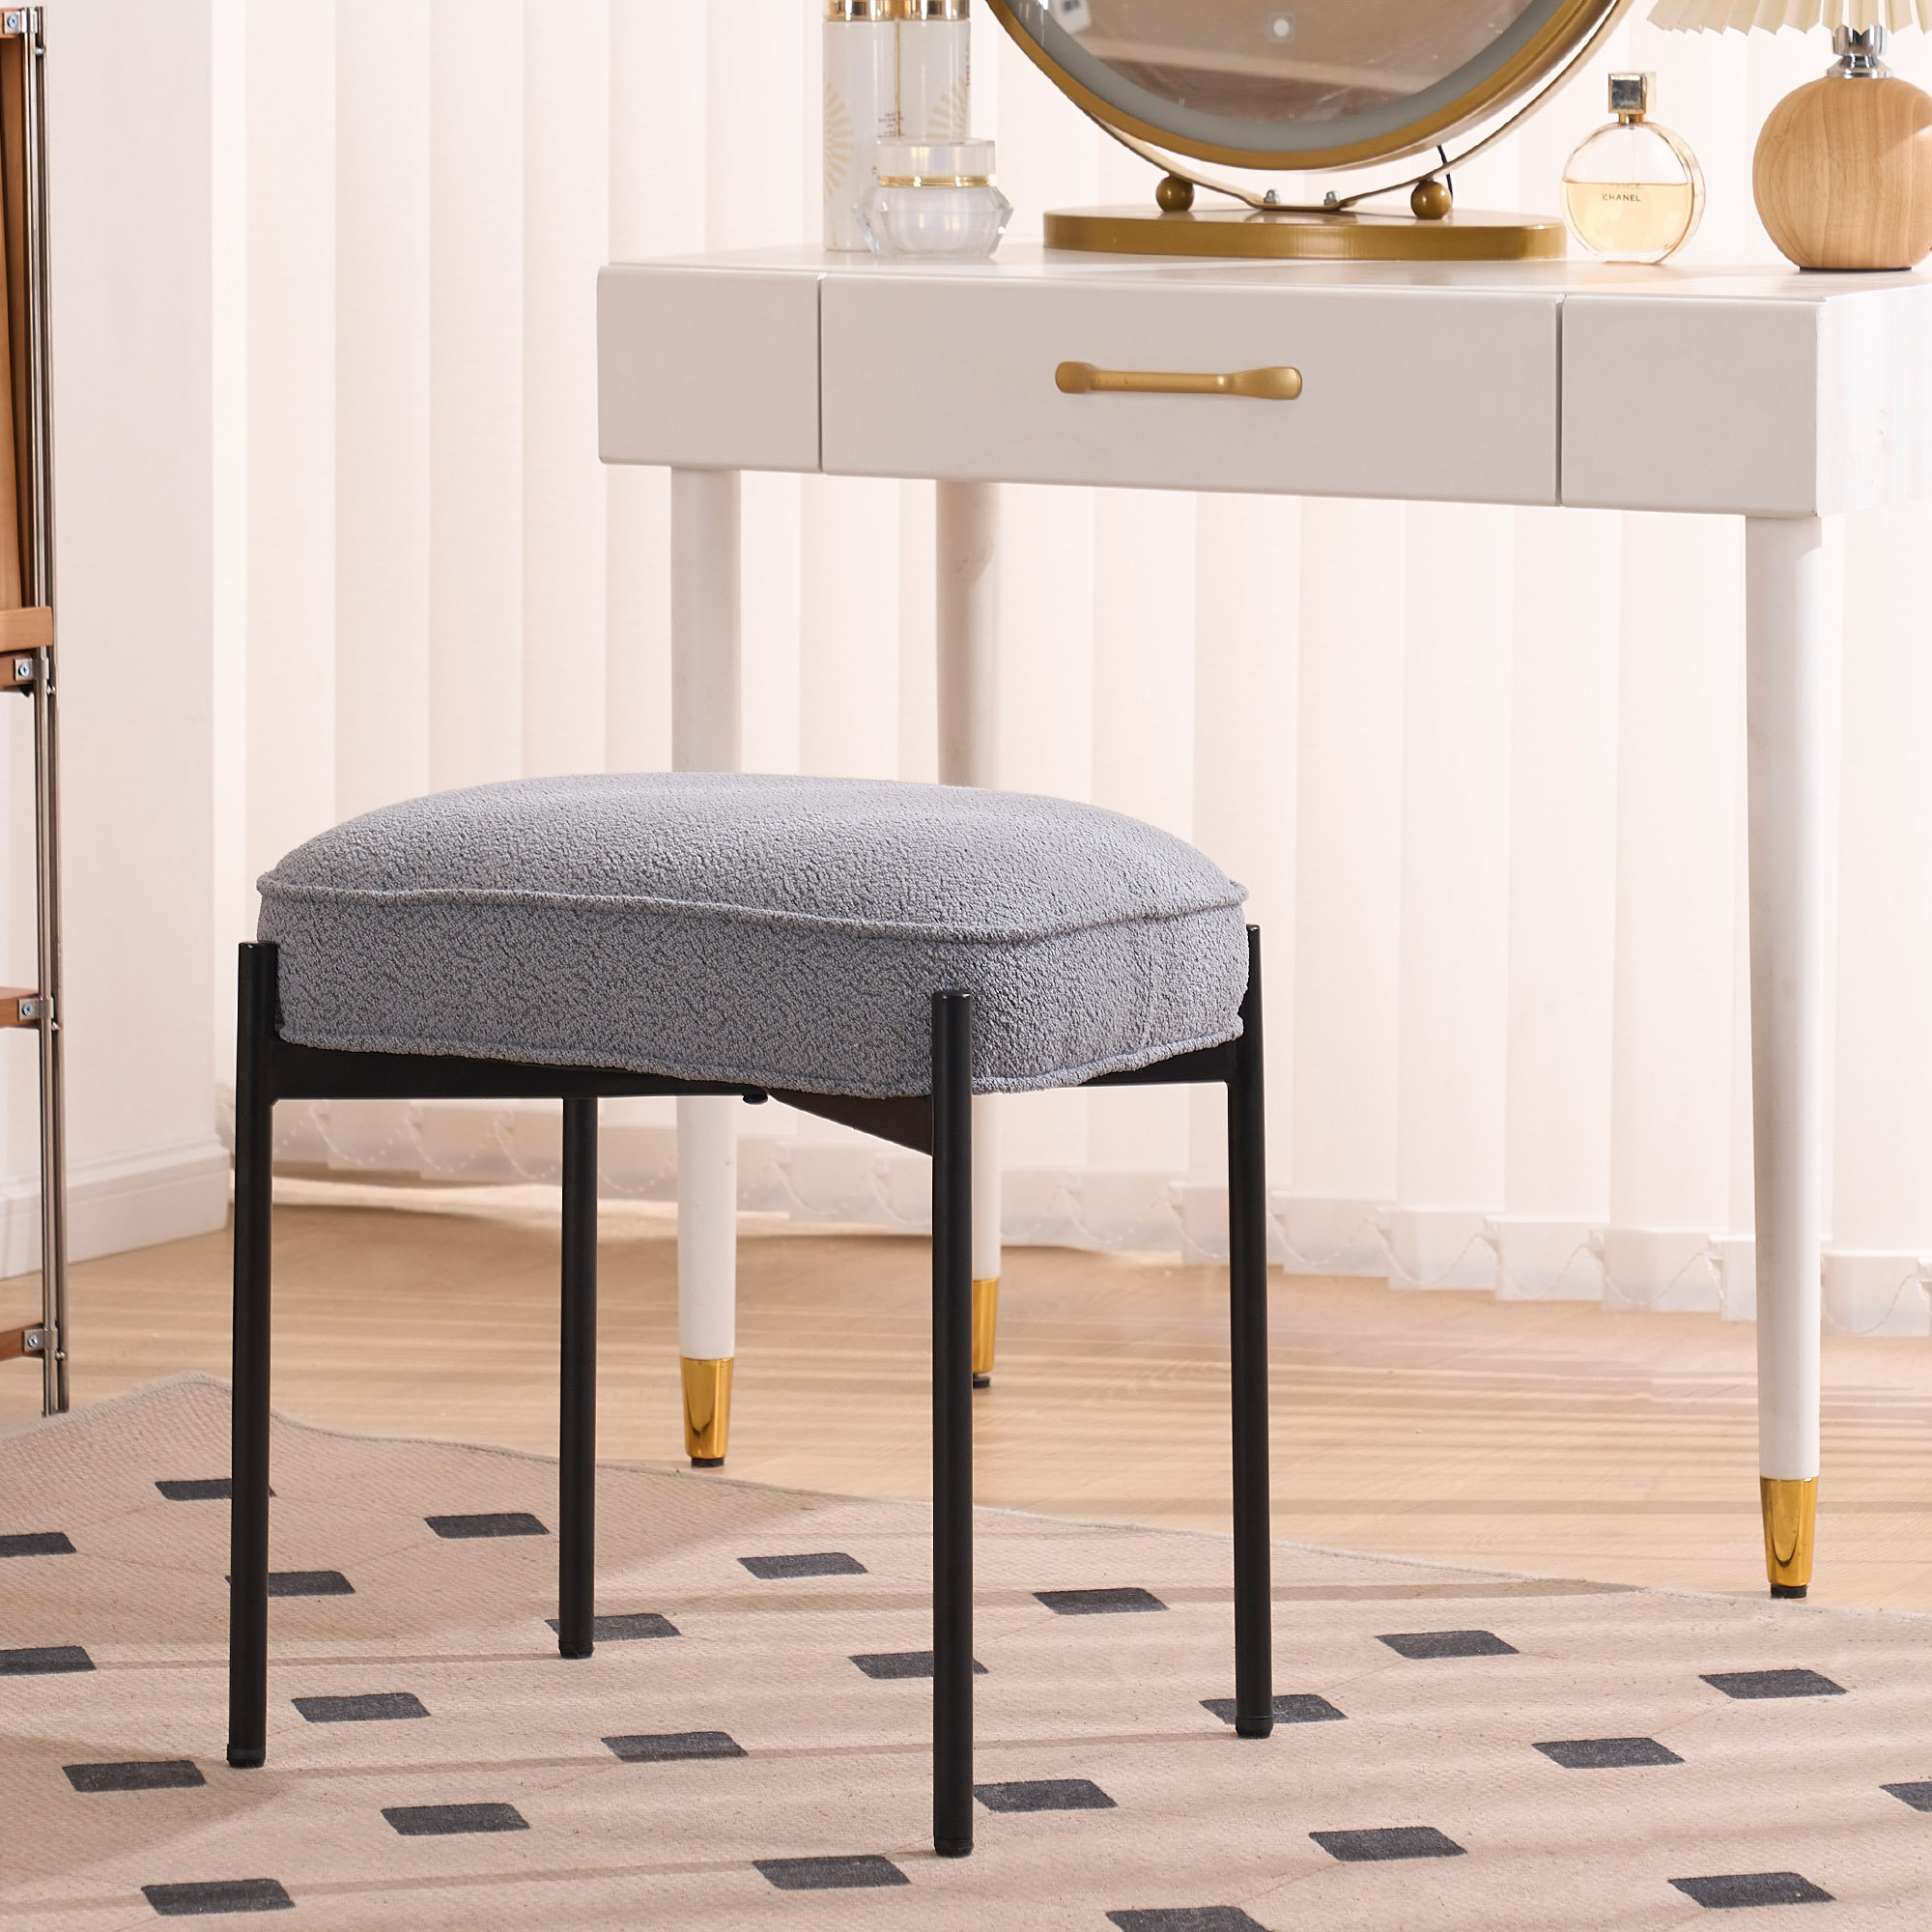 Romere Vanity Stool Fabric Upholstered Accent Stool Rectangle Makeup Stool Ottoman with Metal Legs Ebern Designs Seat Color: Light Gray